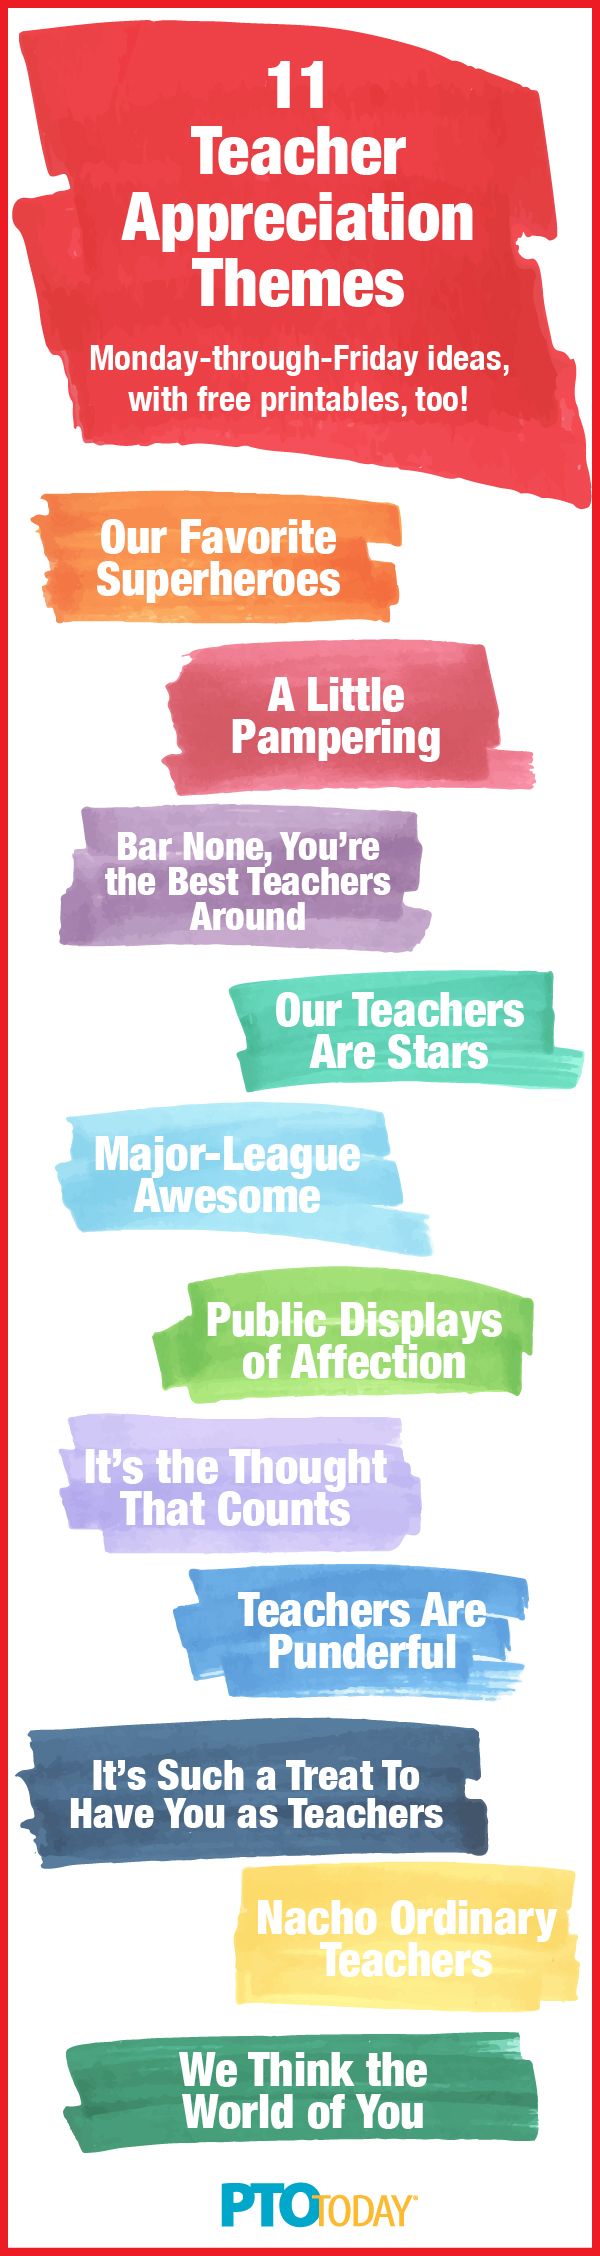 Get our teacher appreciation week theme ideas (and free printables, too!)